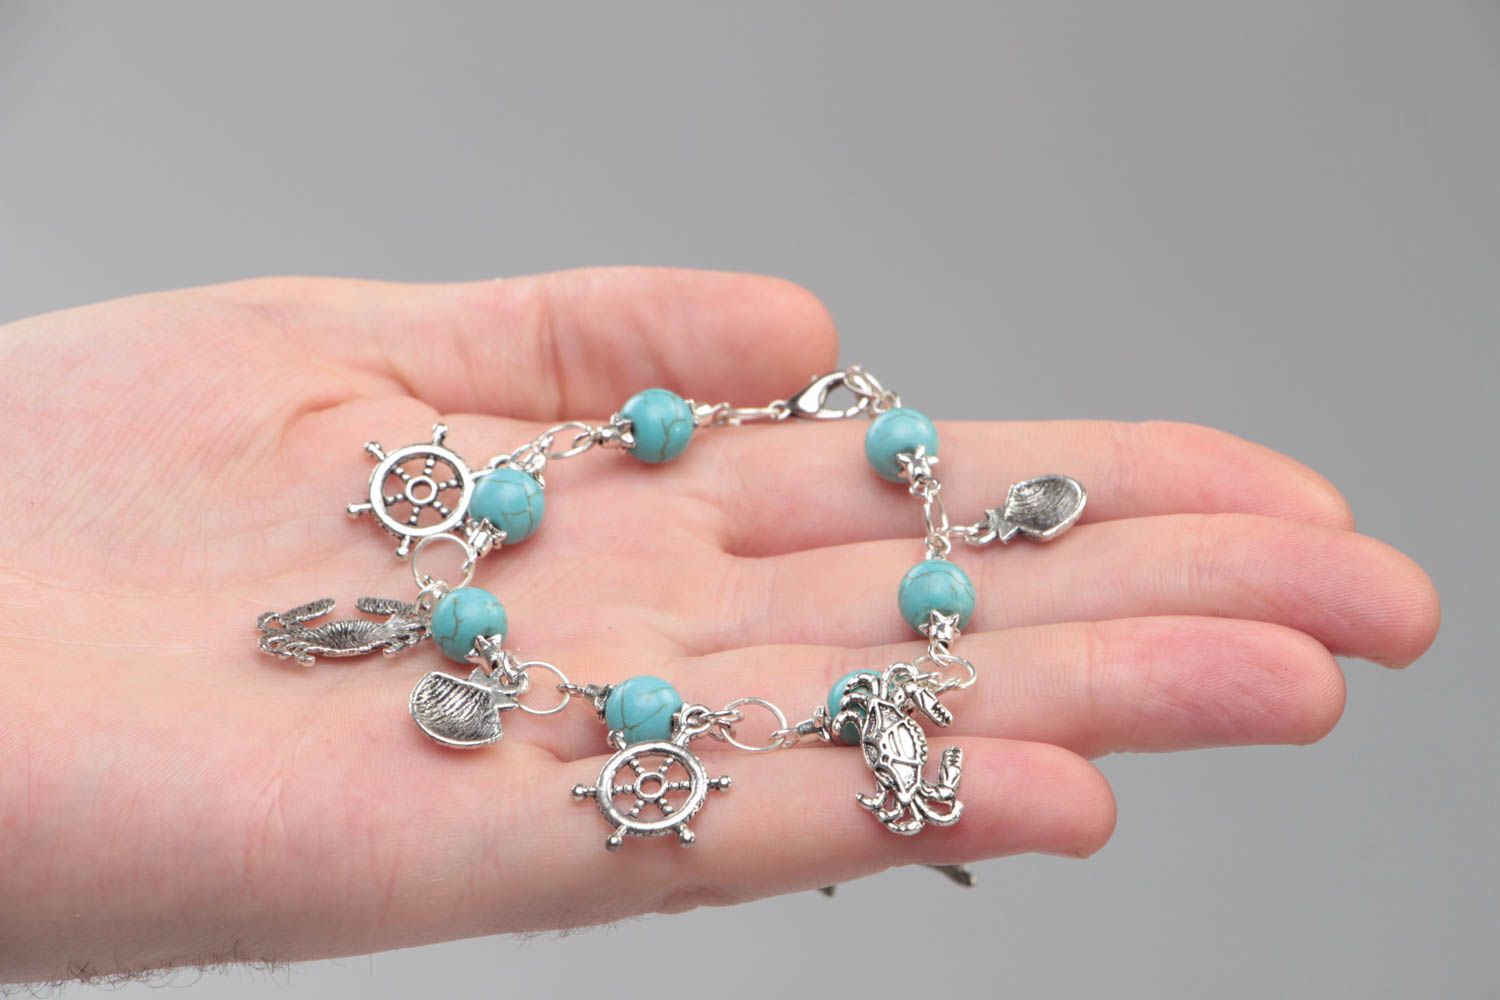 Handmade turquoise bracelet unusual accessory with metal charms cute jewelry photo 5